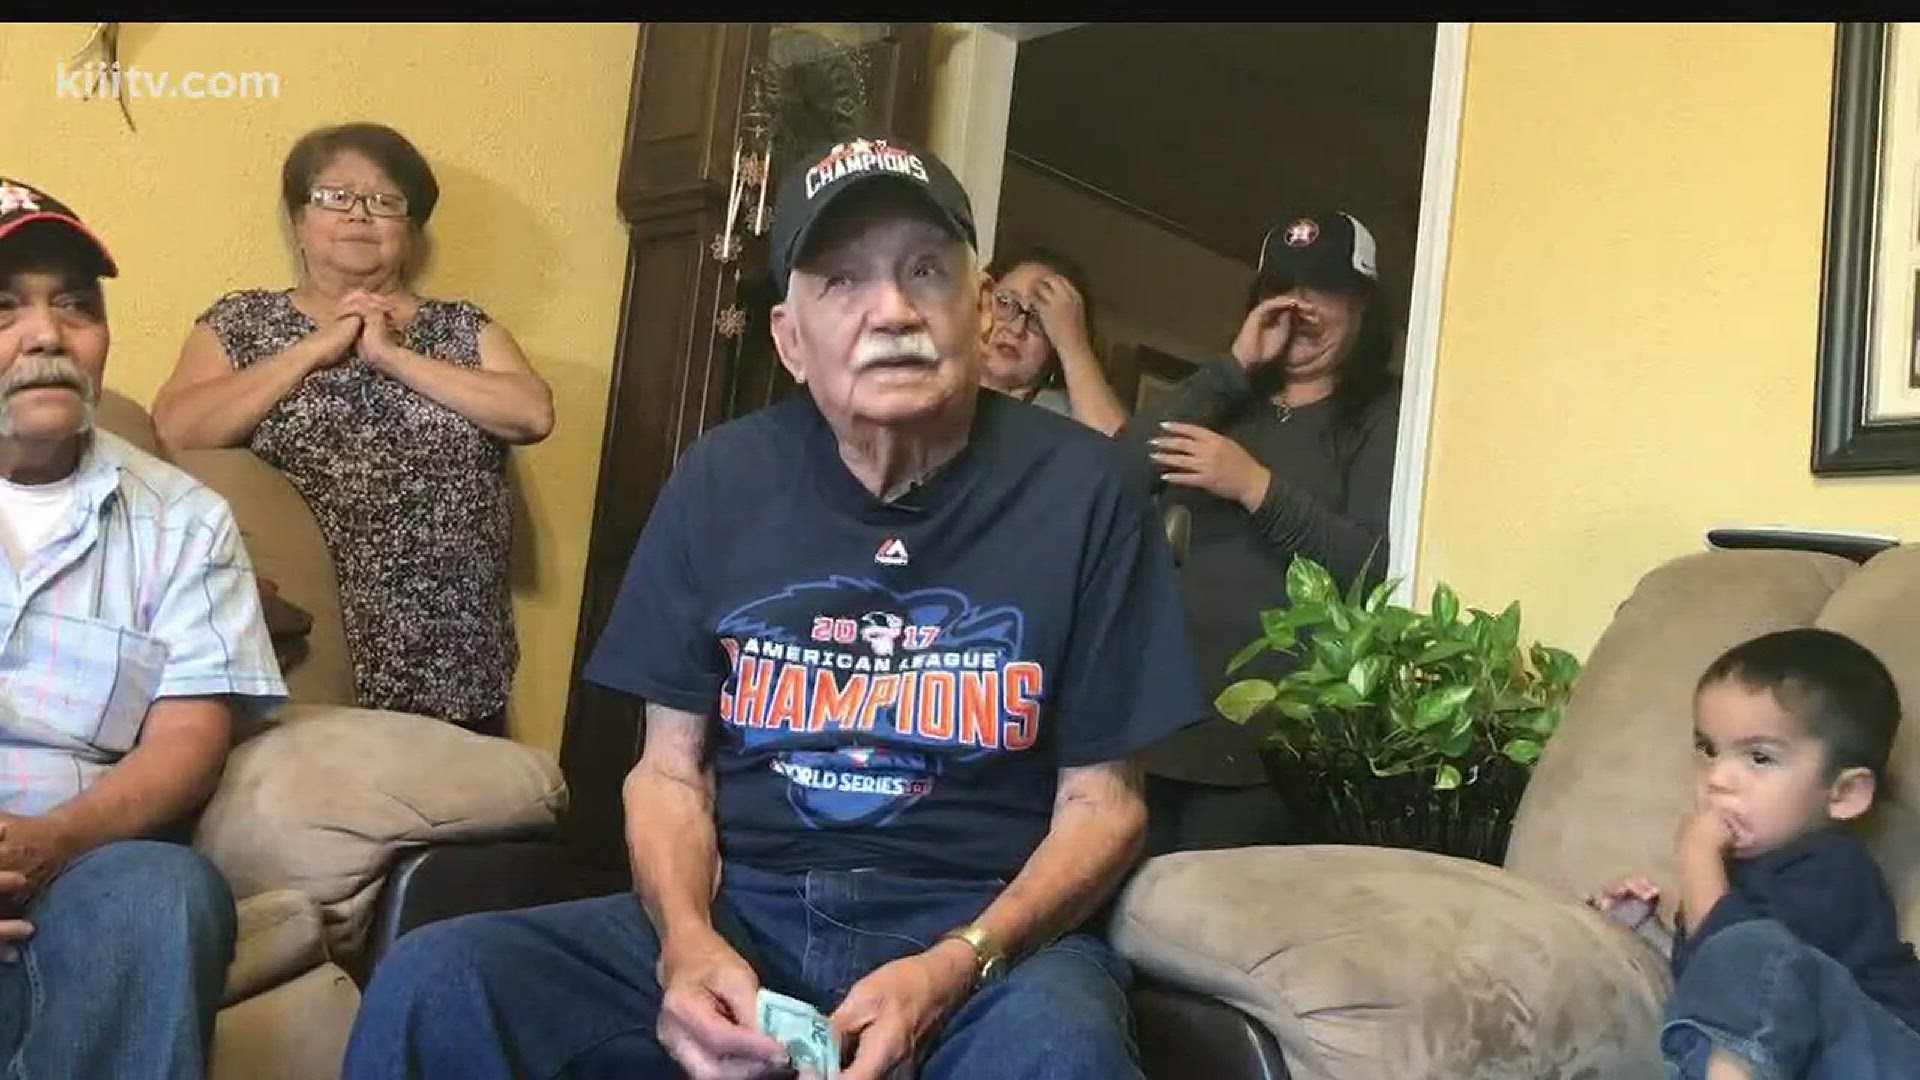 Monday 3News shared the Facebook video of Garza rooting for the Astros. "Come on, Astros!" Garza said in a video posted to Facebook. "Win this championship World Series, 2017!"